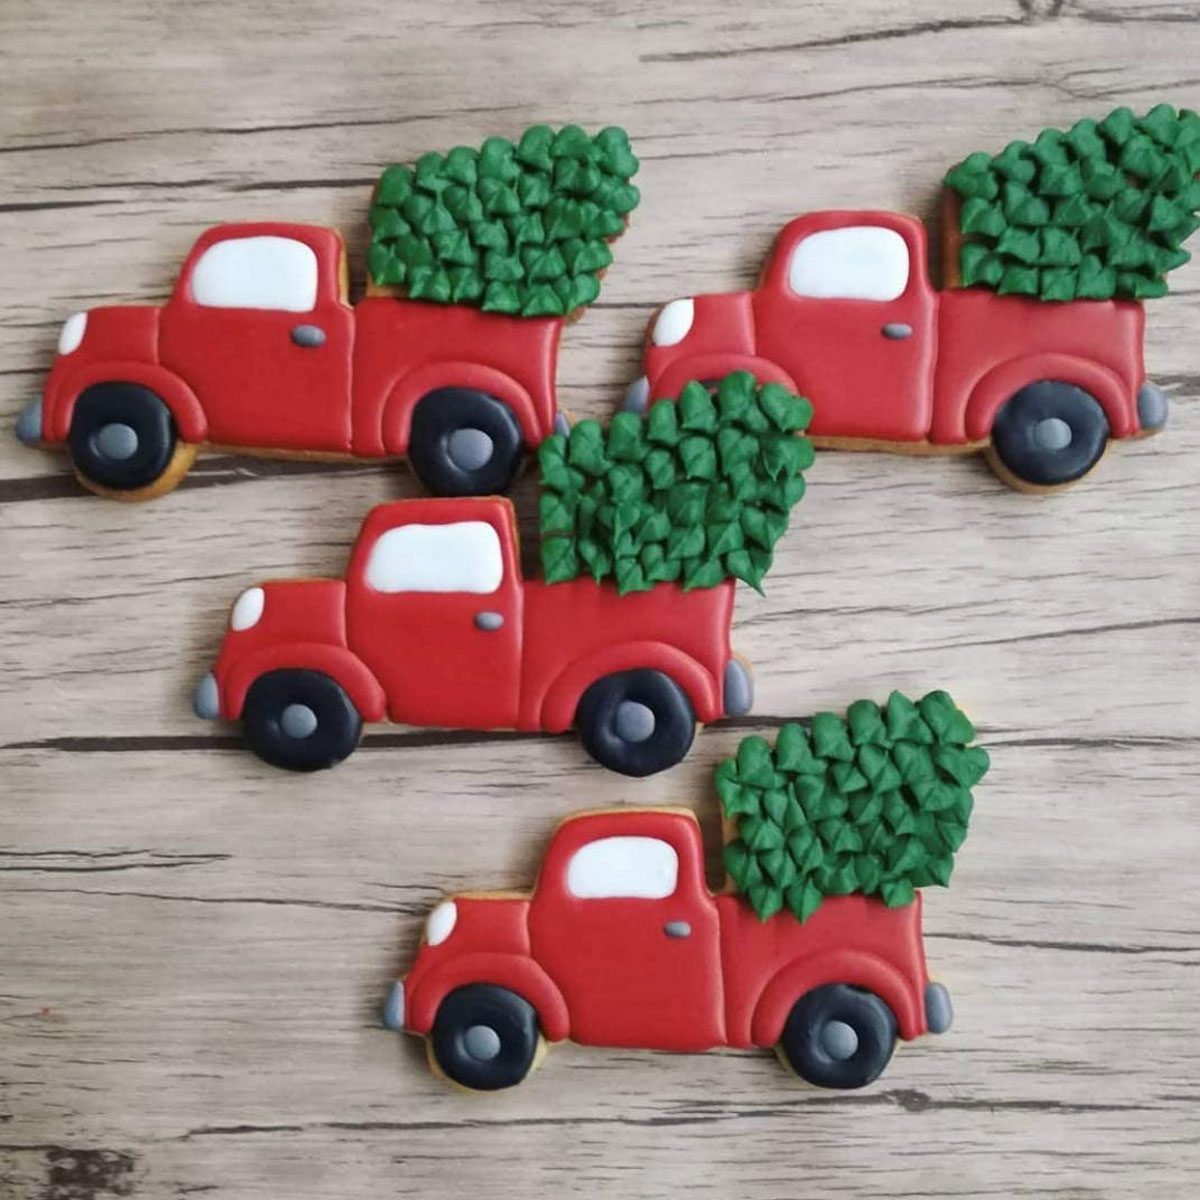 <p>Special delivery! This <a href="https://www.amazon.com/dp/B07KR9L58V" rel="noopener noreferrer">truck cookie cutter</a> represents the annual tradition of placing a freshly-chopped tree in the back of your truck and making your way home to decorate it. Tap into that feeling of nostalgia by decorating green trees coming out of an old red pickup truck.</p> <p class="listicle-page__cta-button-shop"><a class="shop-btn" href="https://www.amazon.com/dp/B07KR9L58V">Shop Now</a></p>